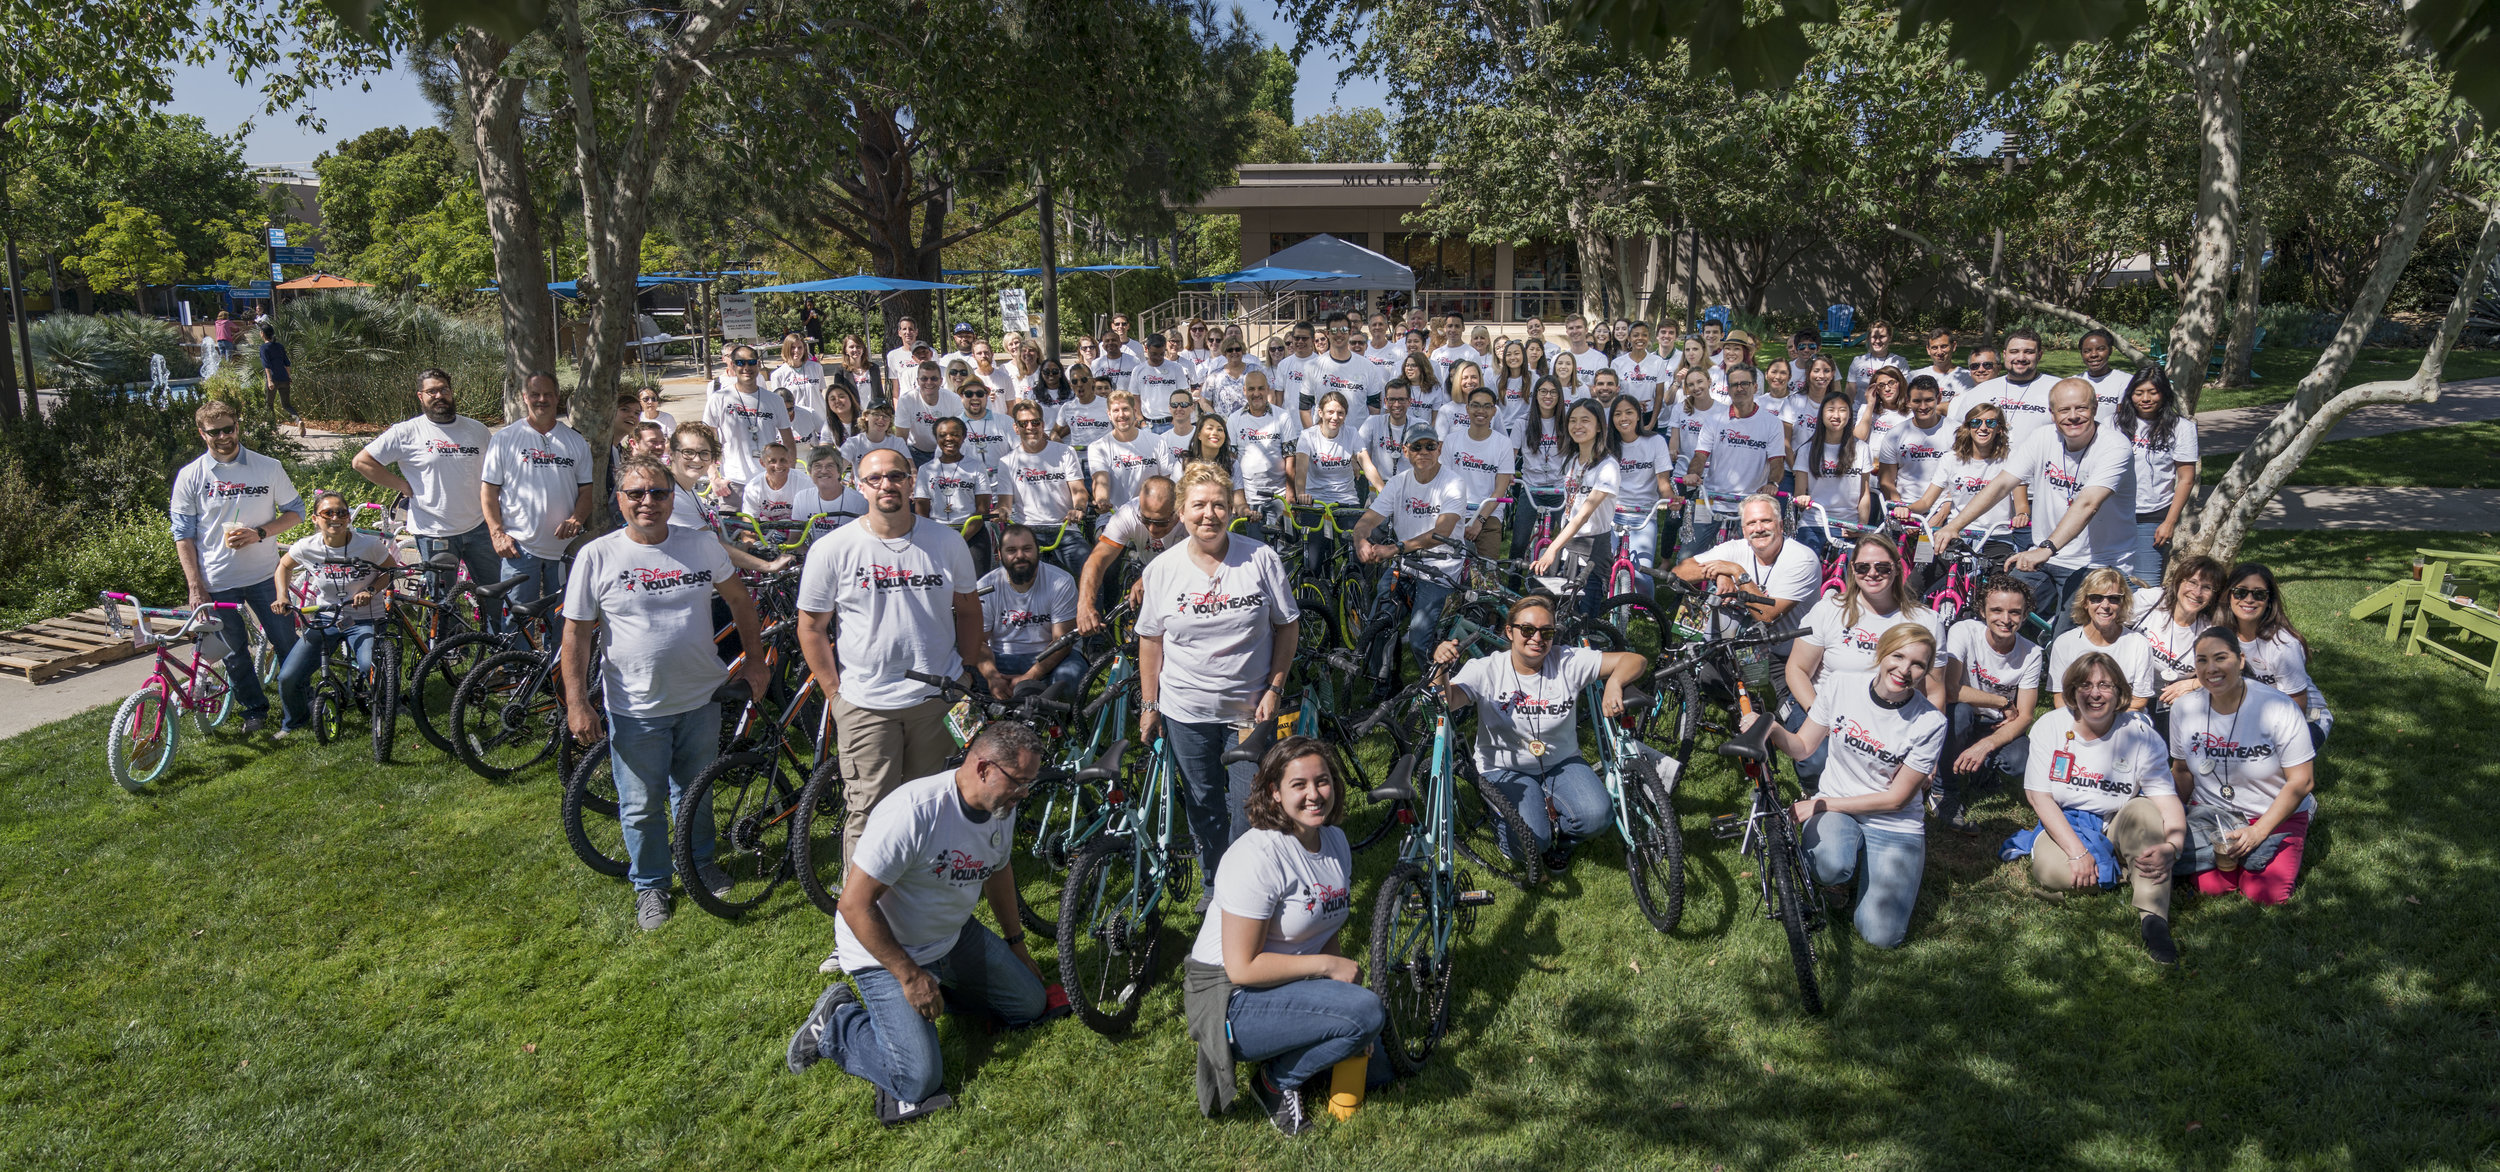 Imagineers ready for their VoluntEARS event gather on the greenspace at the Walt Disney Imagineering offices.